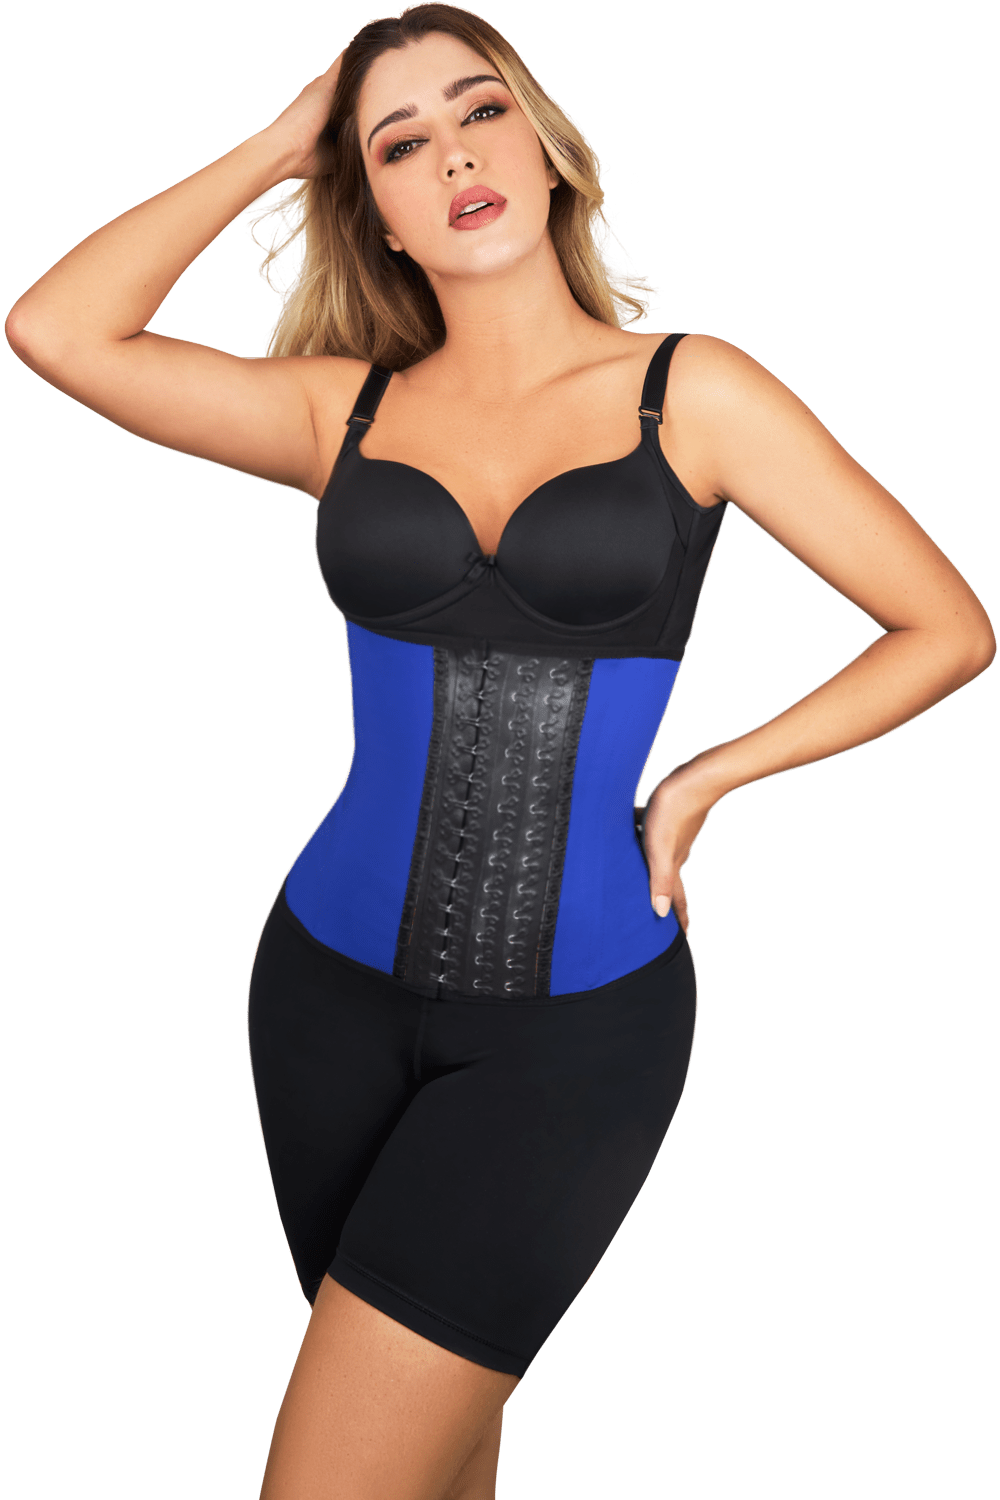 Colombian Waist Corsets Velcro Trainer For Gym, Hooksand Velcro Colmbiana